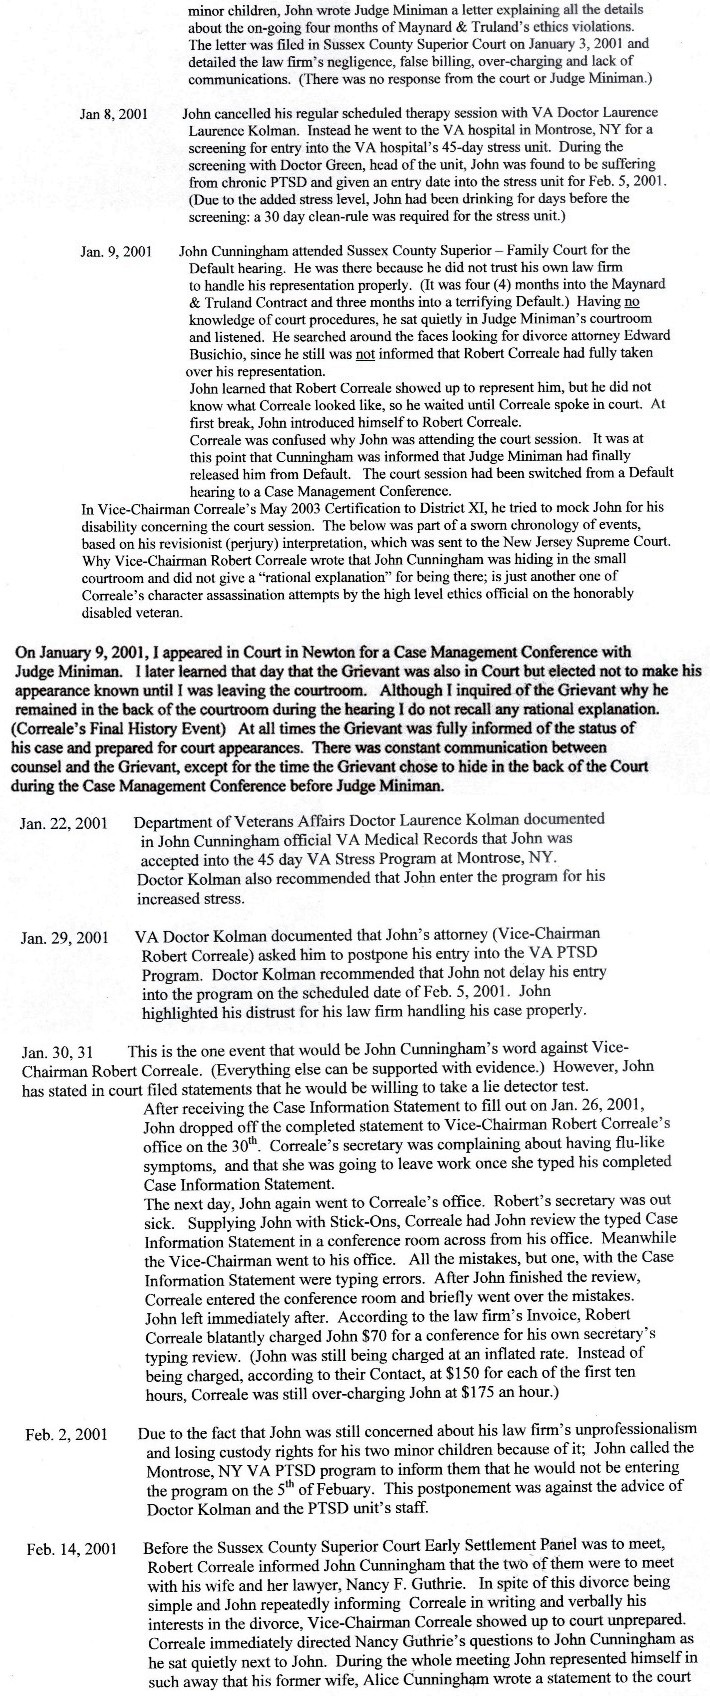 chronology_of_events_page_5_6_part_1.jpg